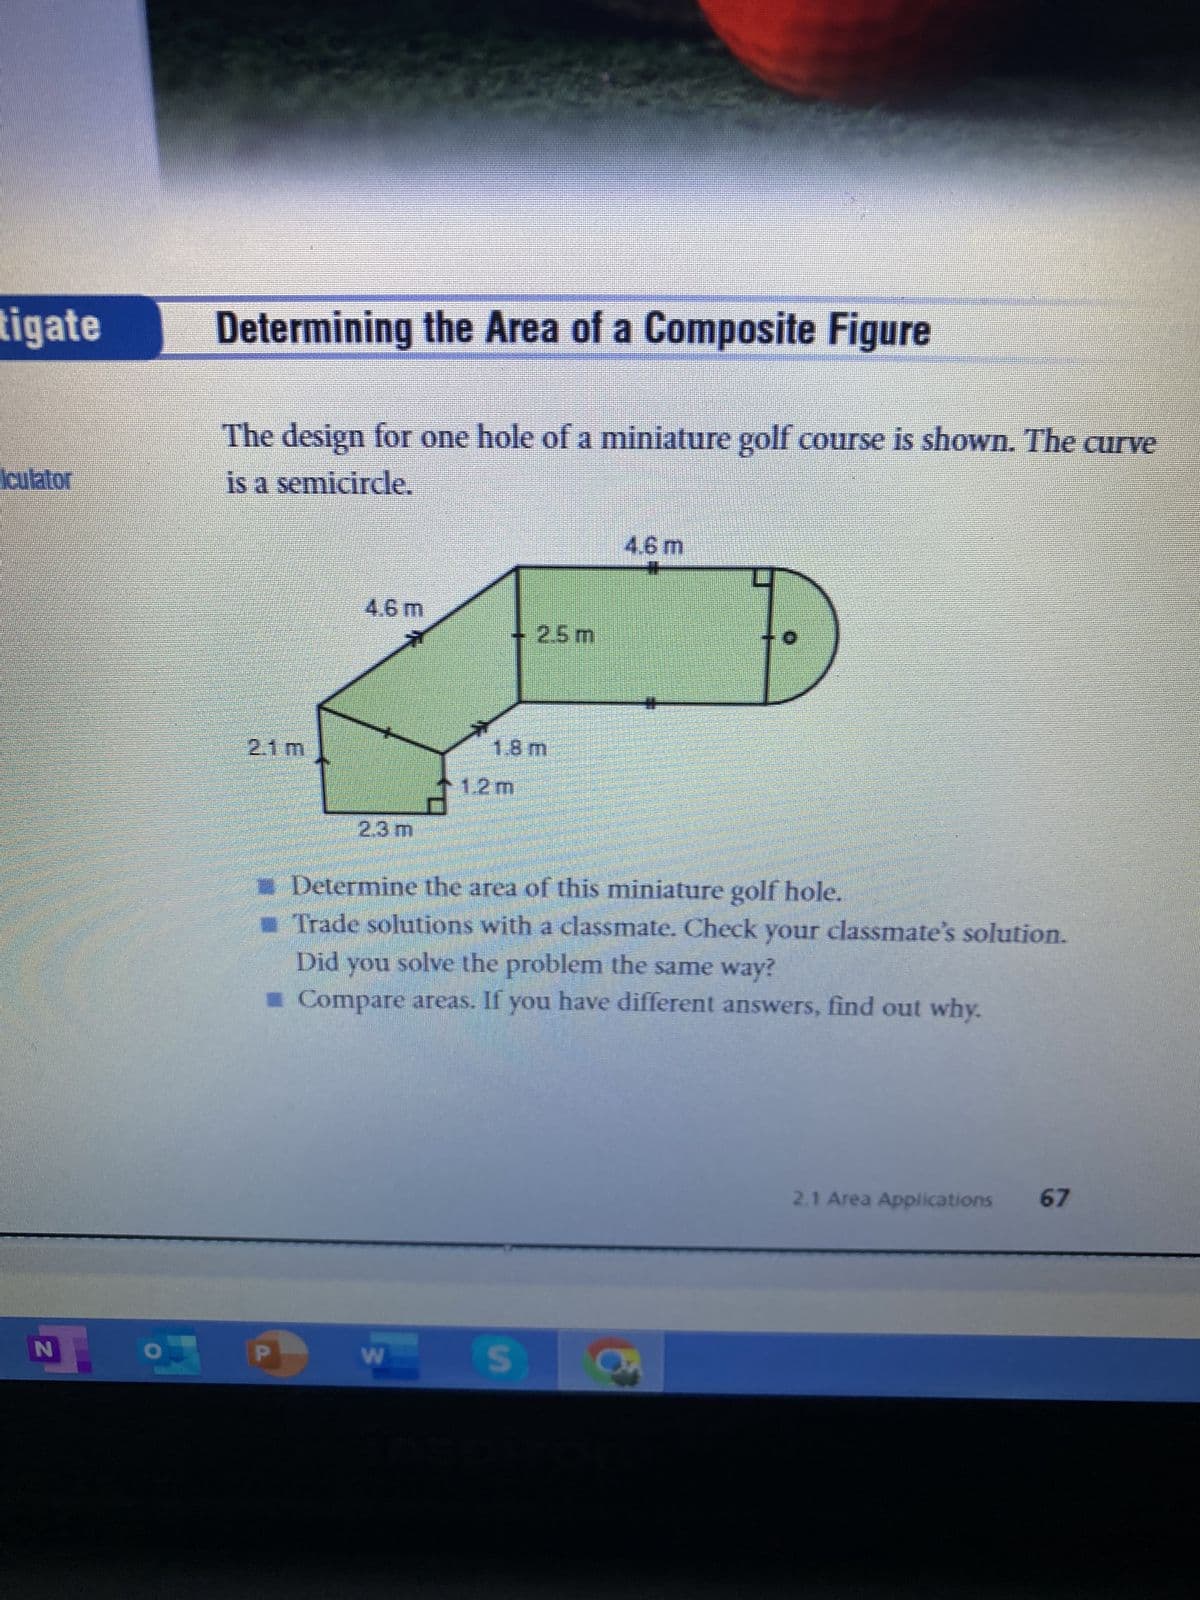 tigate
lculator
I
N
Determining the Area of a Composite Figure
The design for one hole of a miniature golf course is shown. The curve
is a semicircle.
2.1m
4.6 m
2.3 m
W
2.5 m
18m
1.2 m
Determine the area of this miniature golf hole.
Trade solutions with a classmate. Check your classmate's solution.
Did you solve the problem the same way?
■ Compare areas. If you have different answers, find out why.
S
4.6 m
2.1 Area Applications 67